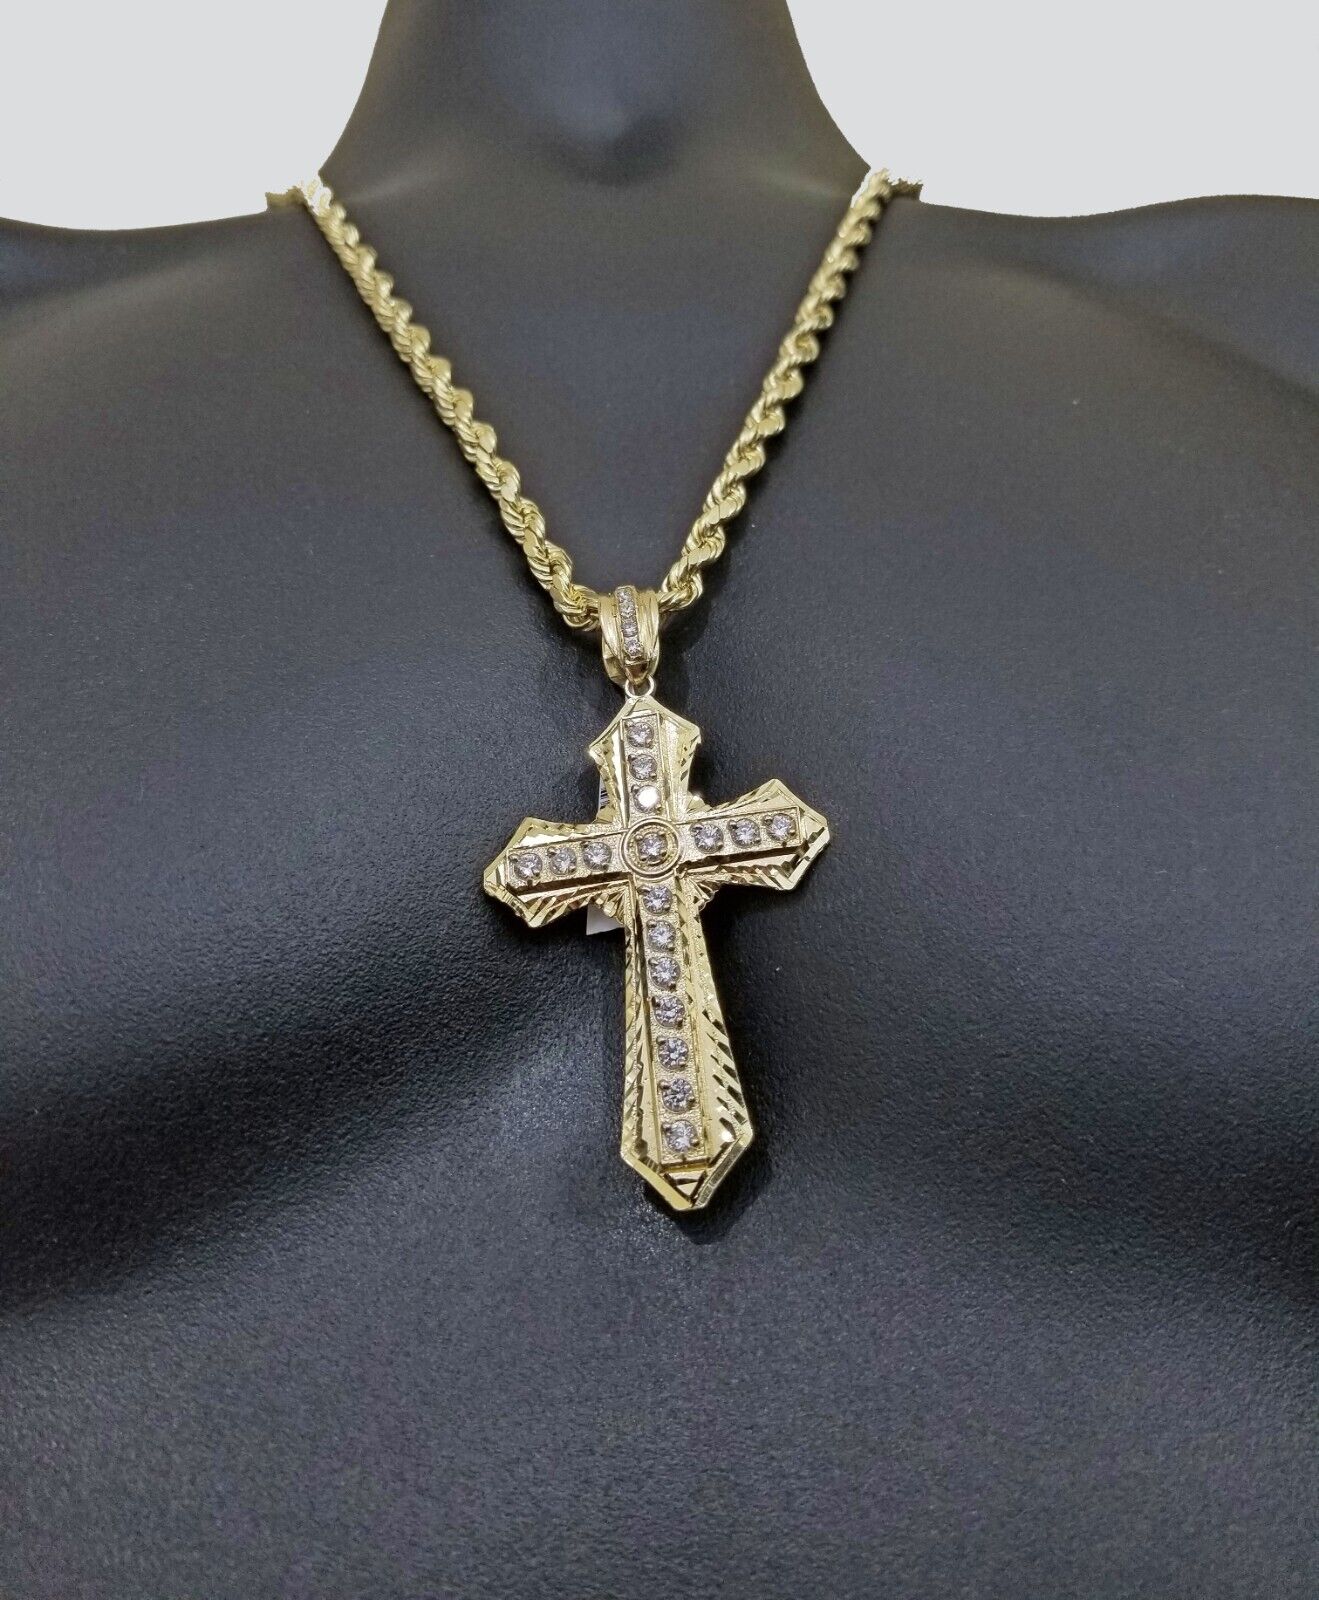 Real 10K Yellow Gold Rope Chain 24 inch Necklace and Cross Pendant 6mm